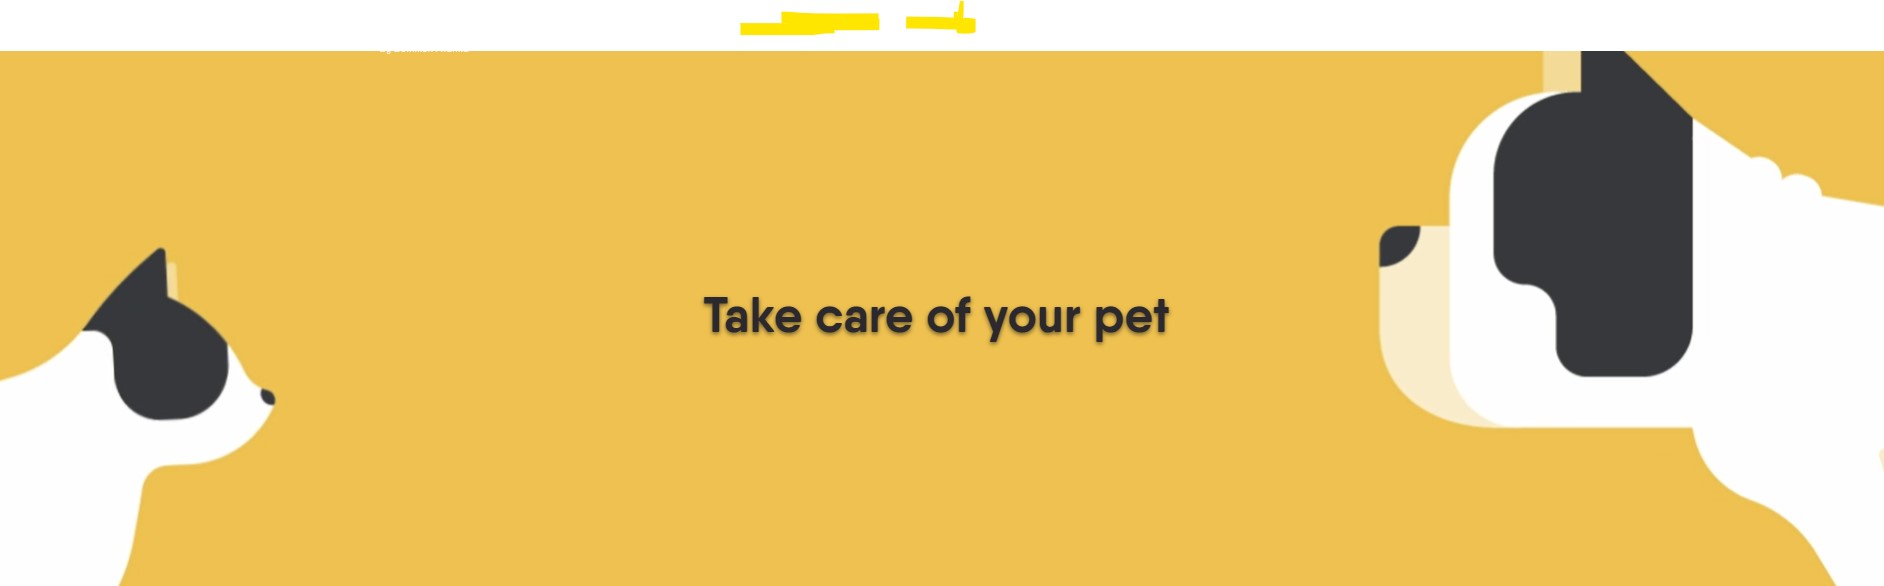 Take care of your pet